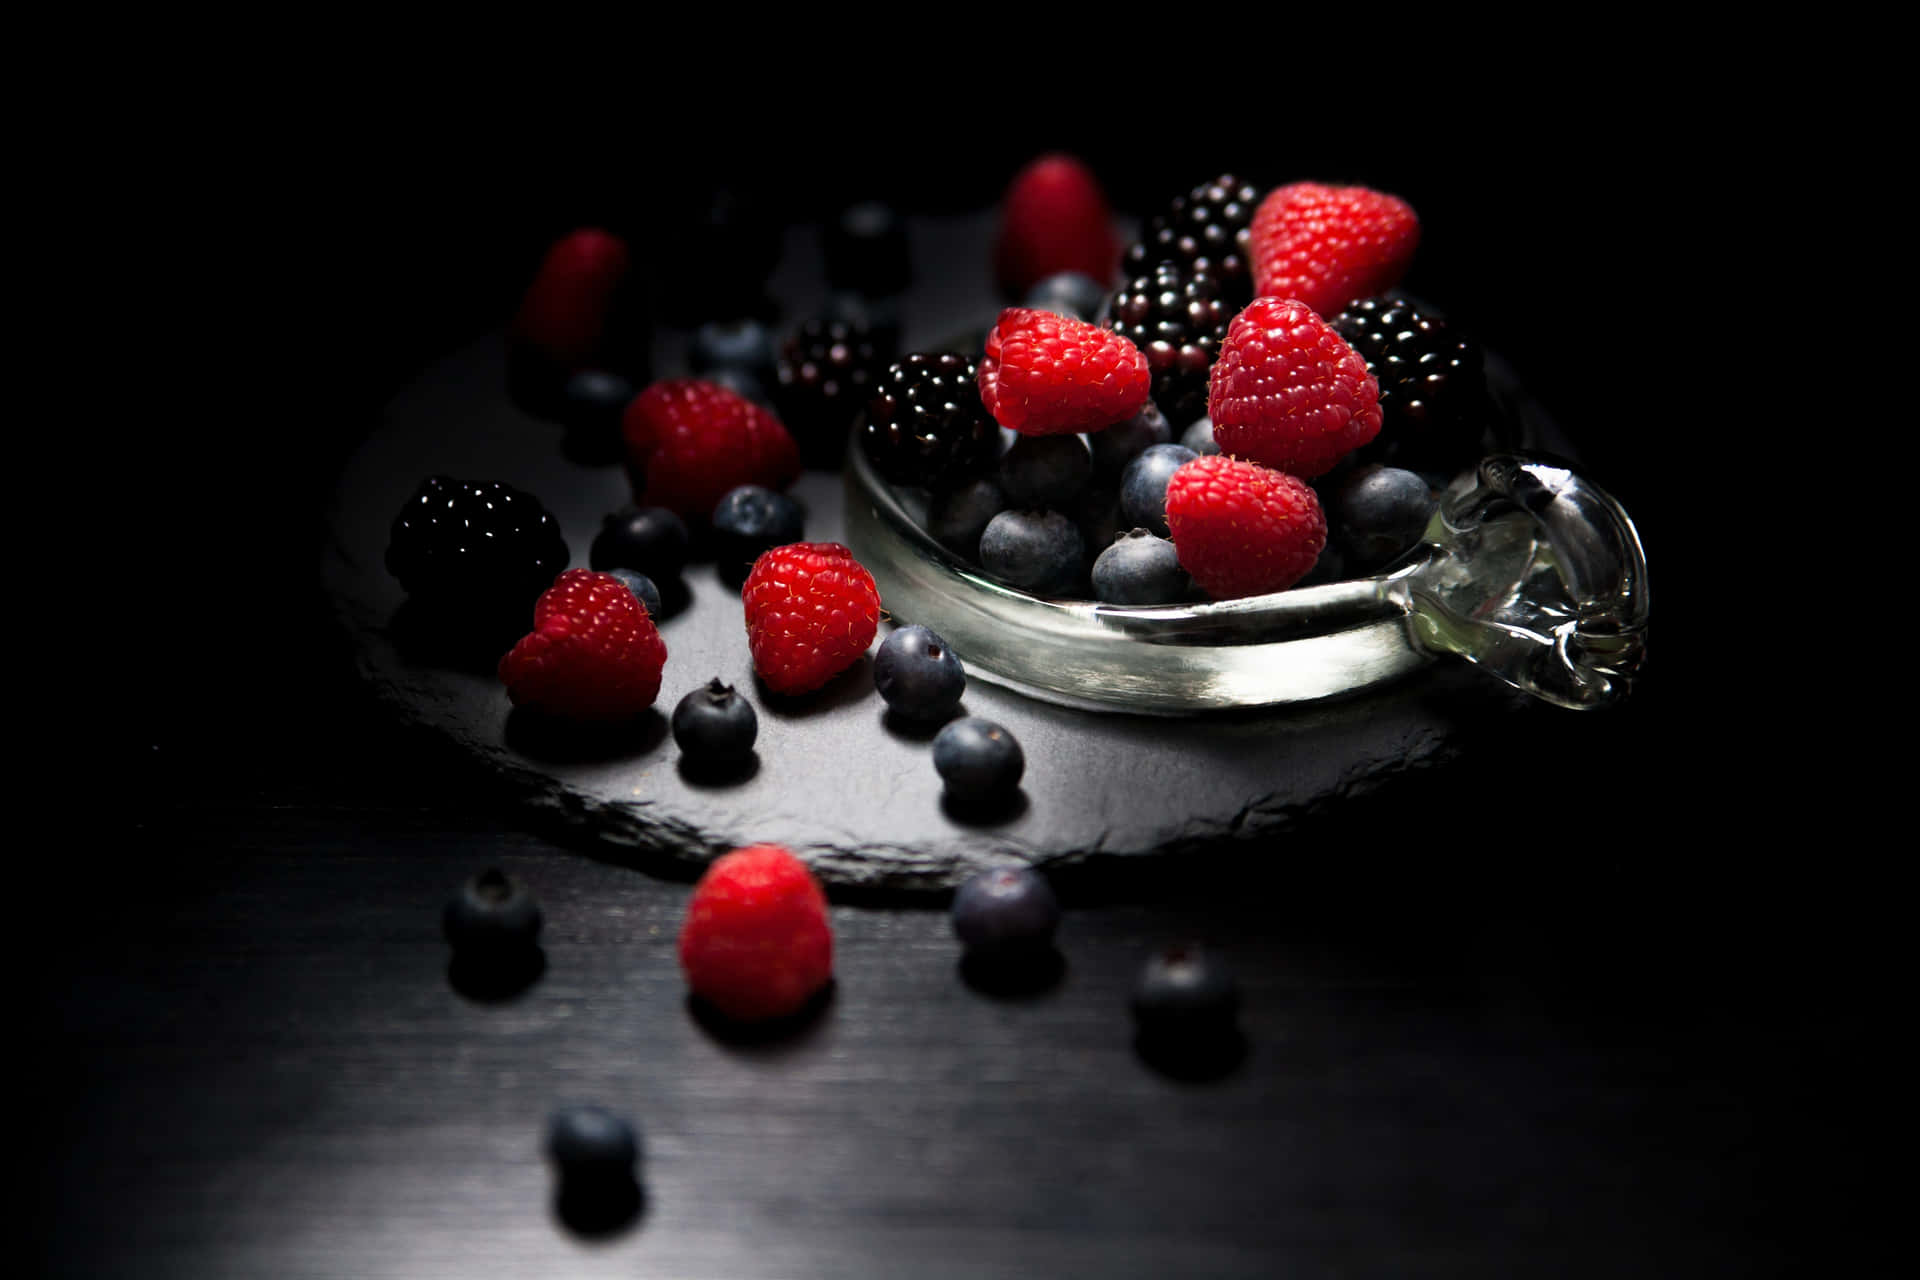 A Glass Bowl Of Berries On A Black Background